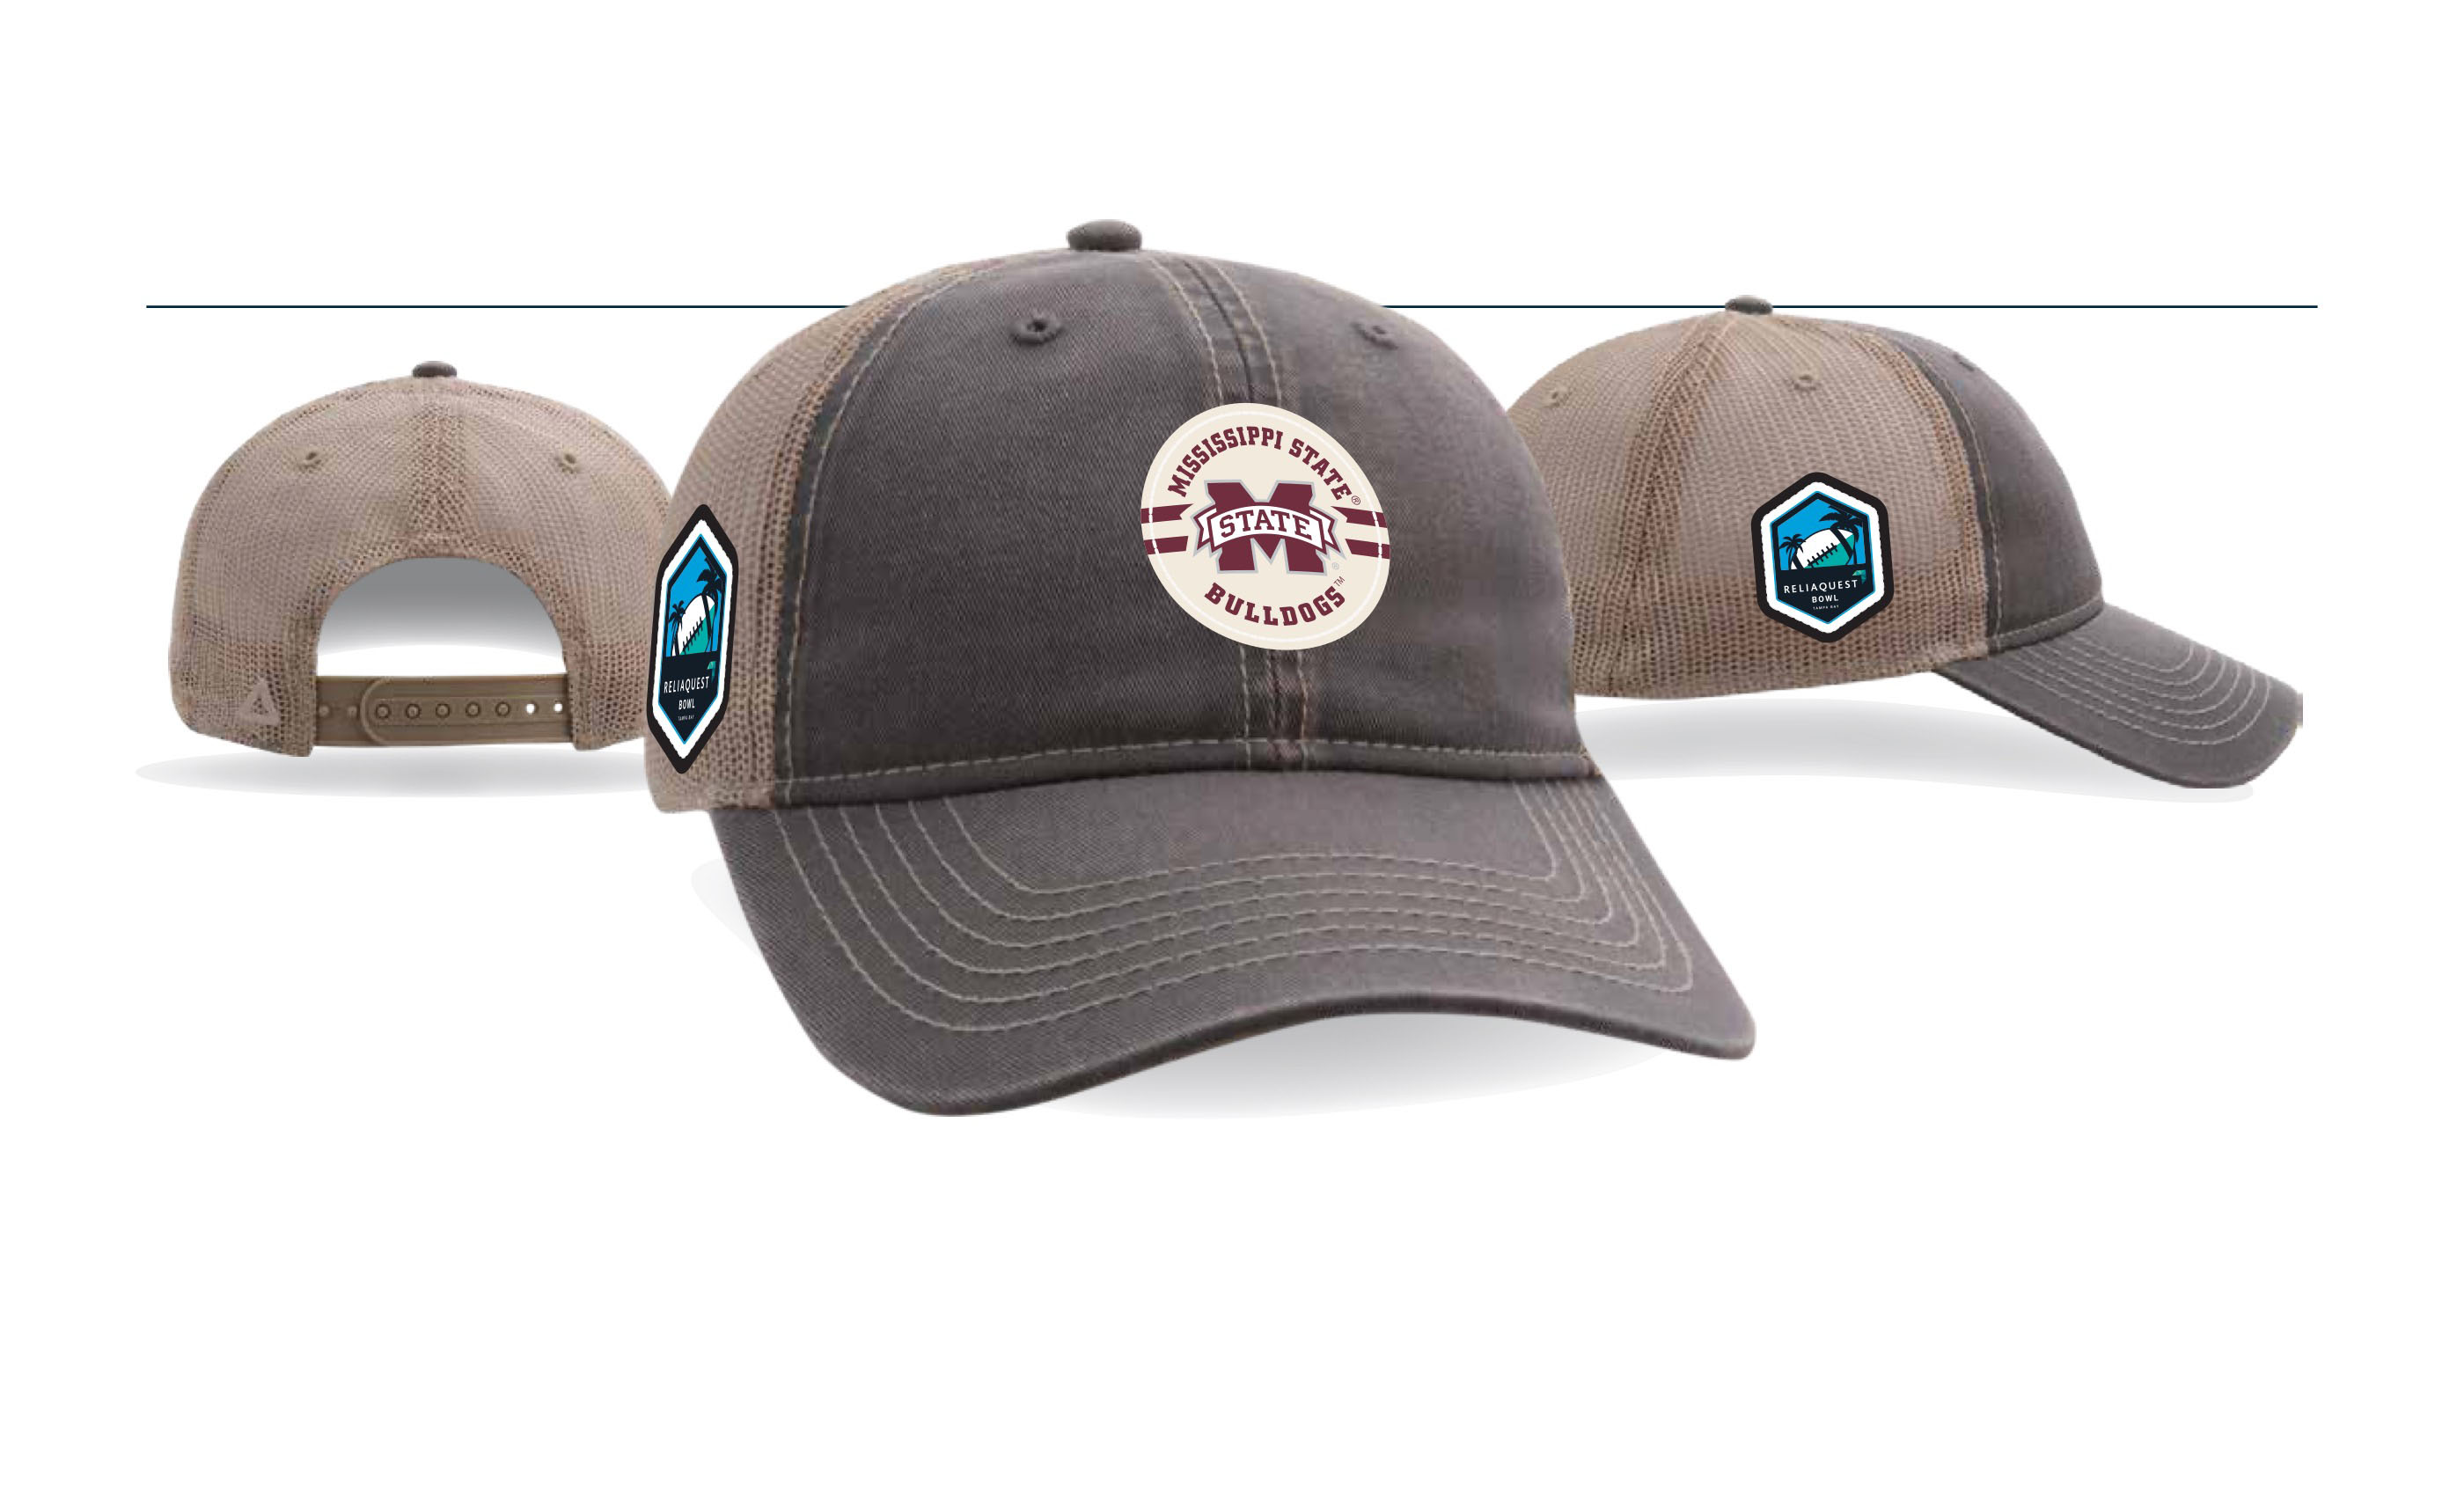 RELIAQUEST BOWL Mississippi State Leather Trucker Cap